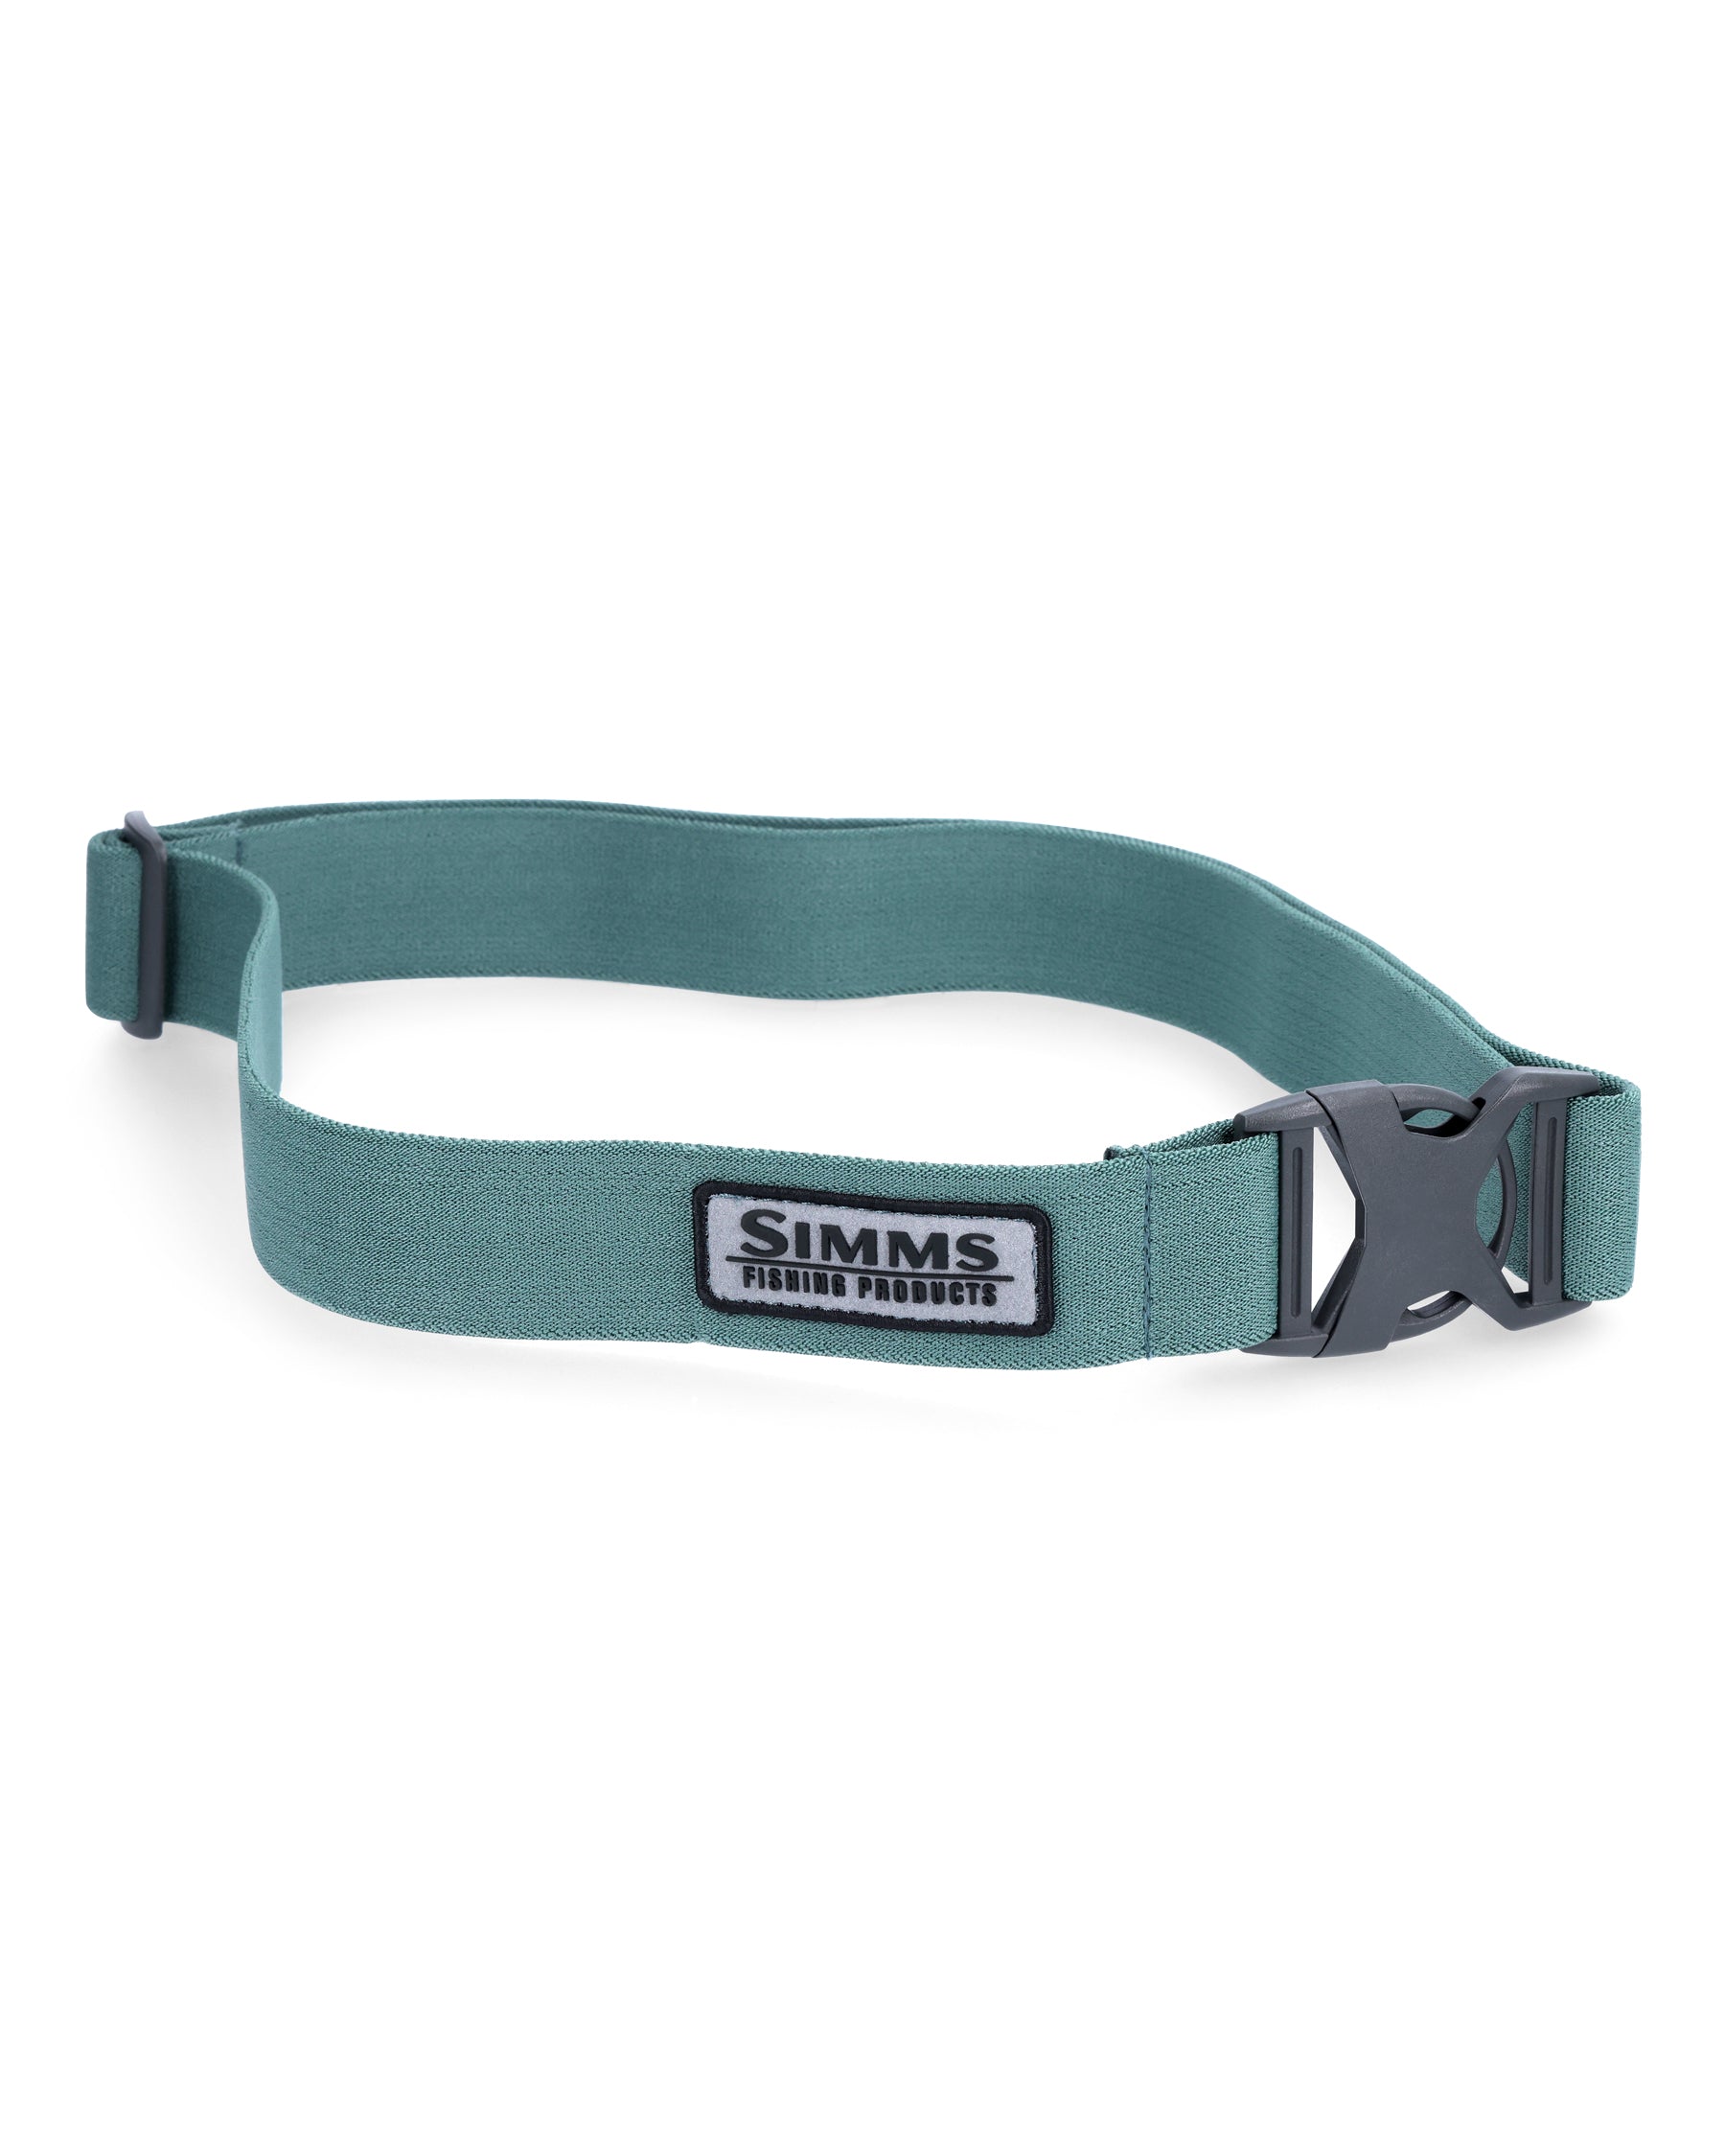 Wading Belt - 1.5  Simms Fishing Products